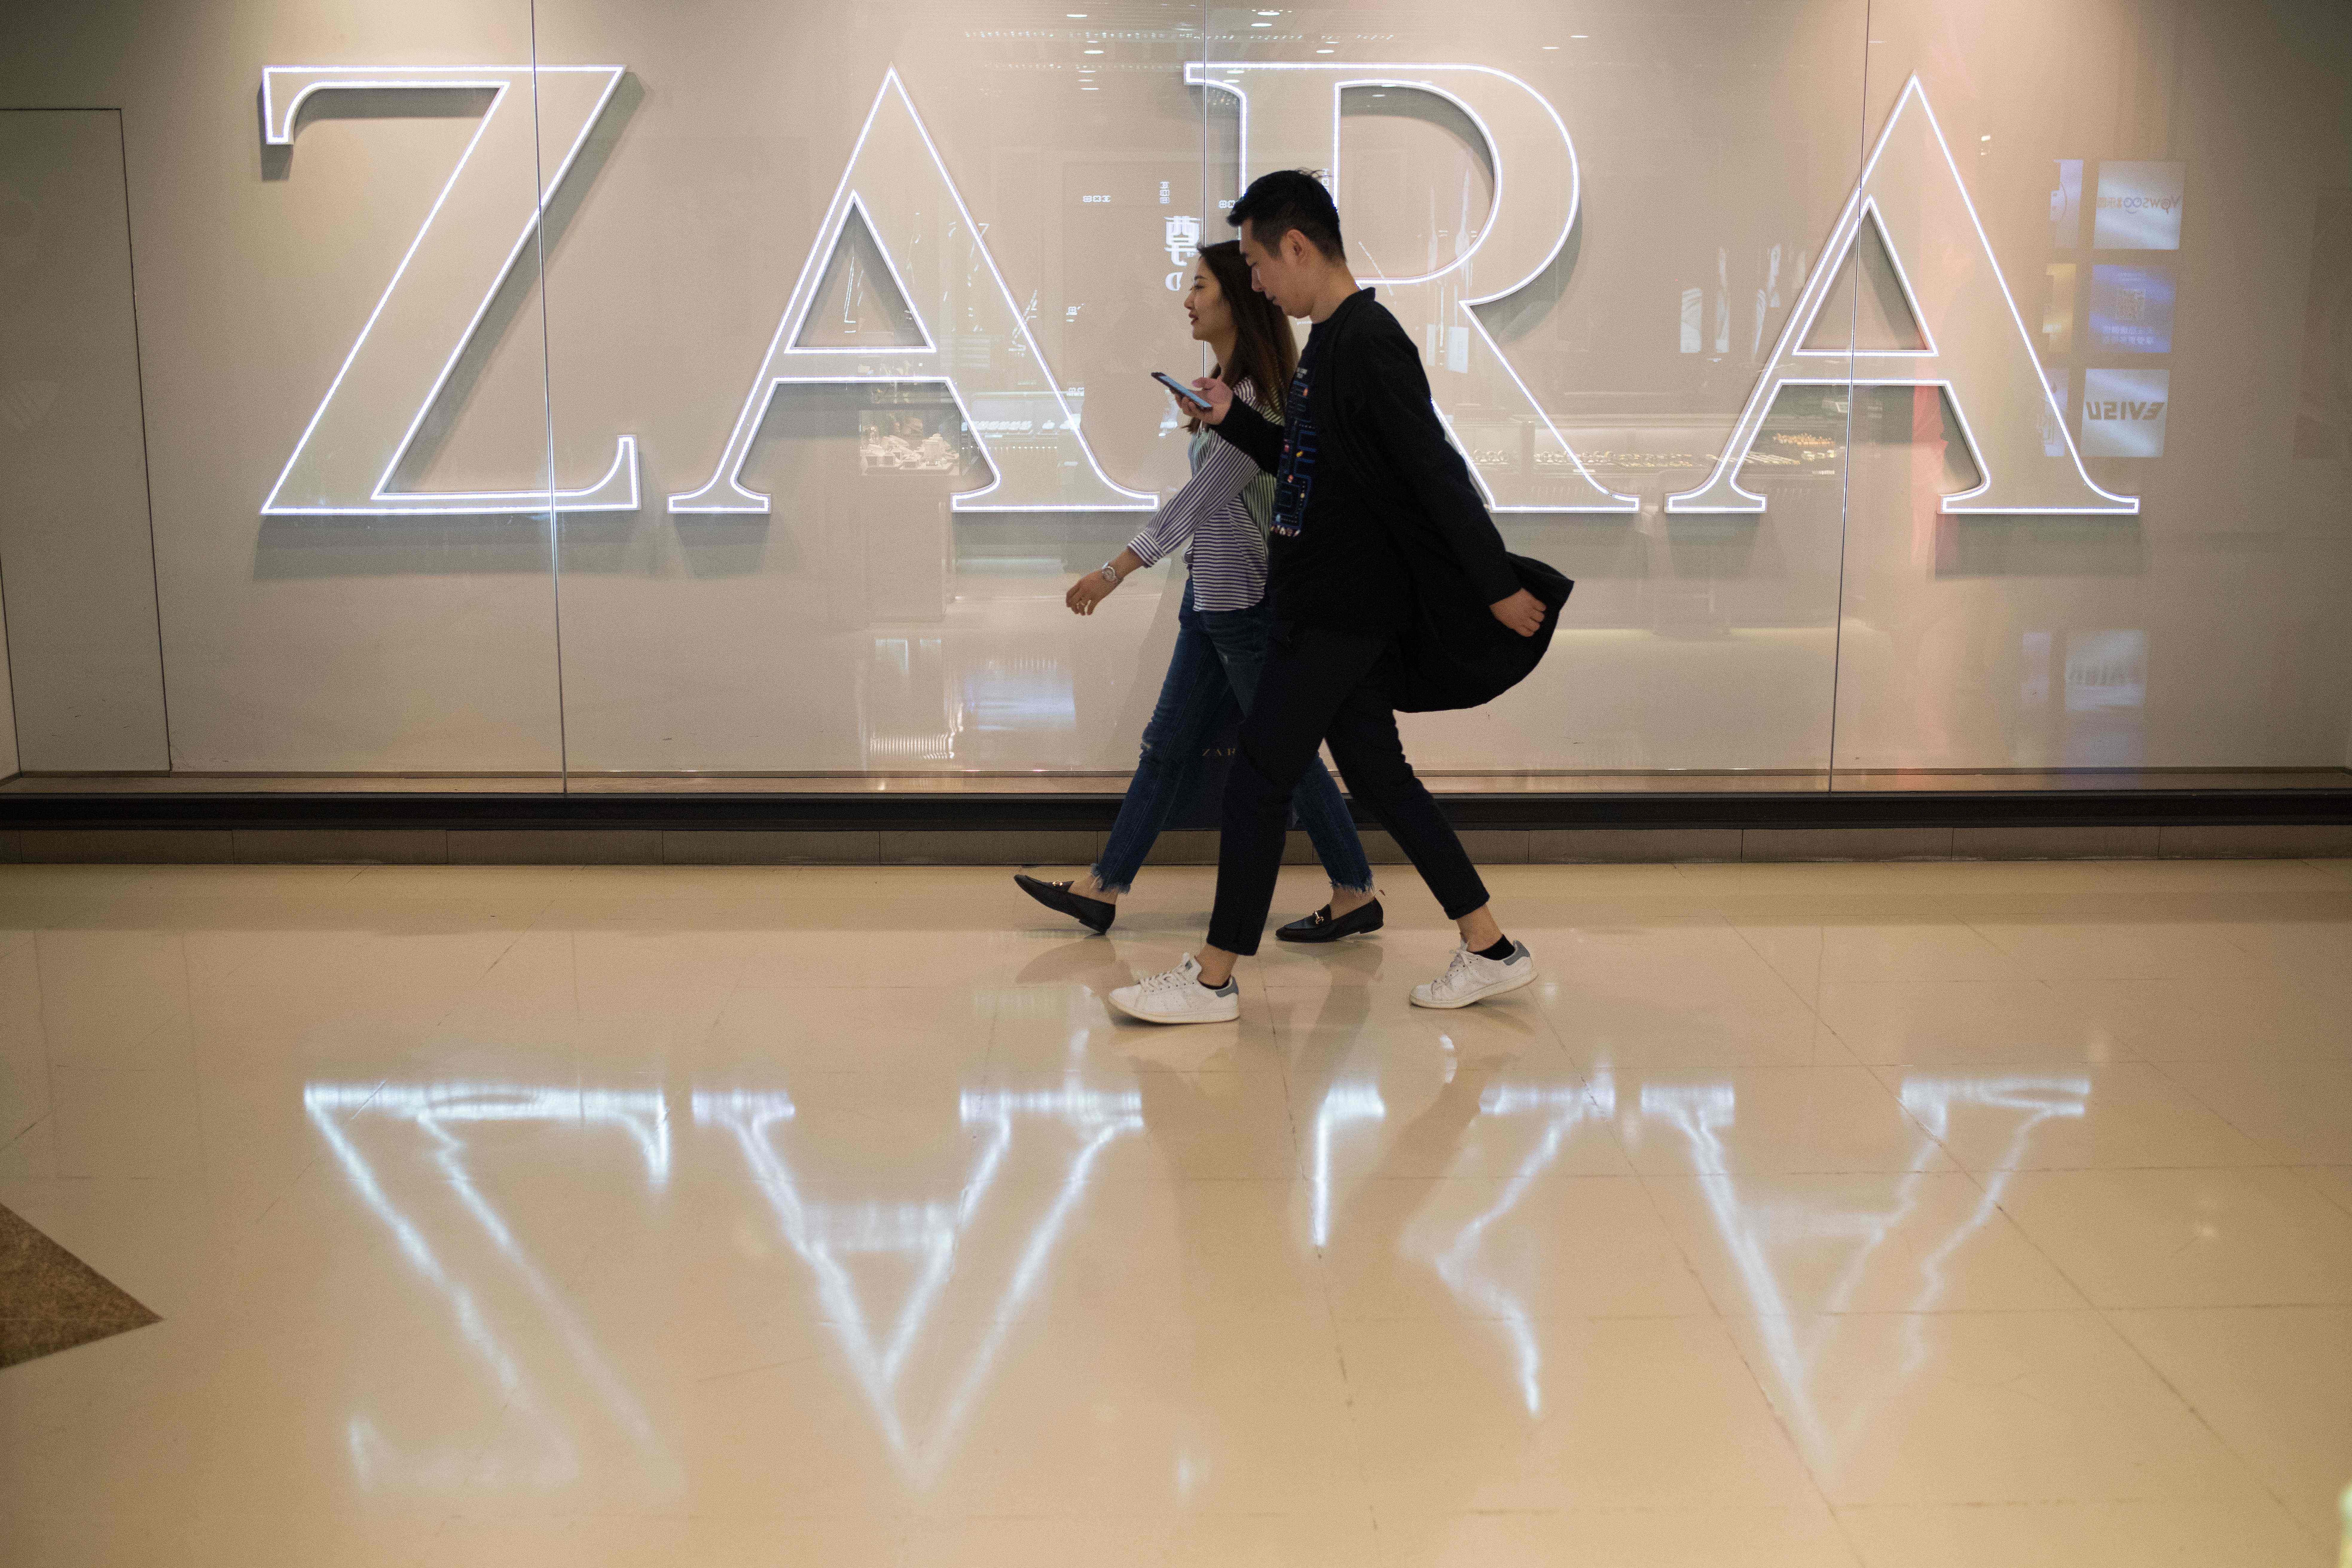 Hong Kong protests: How Zara became the new target of Chinese anger